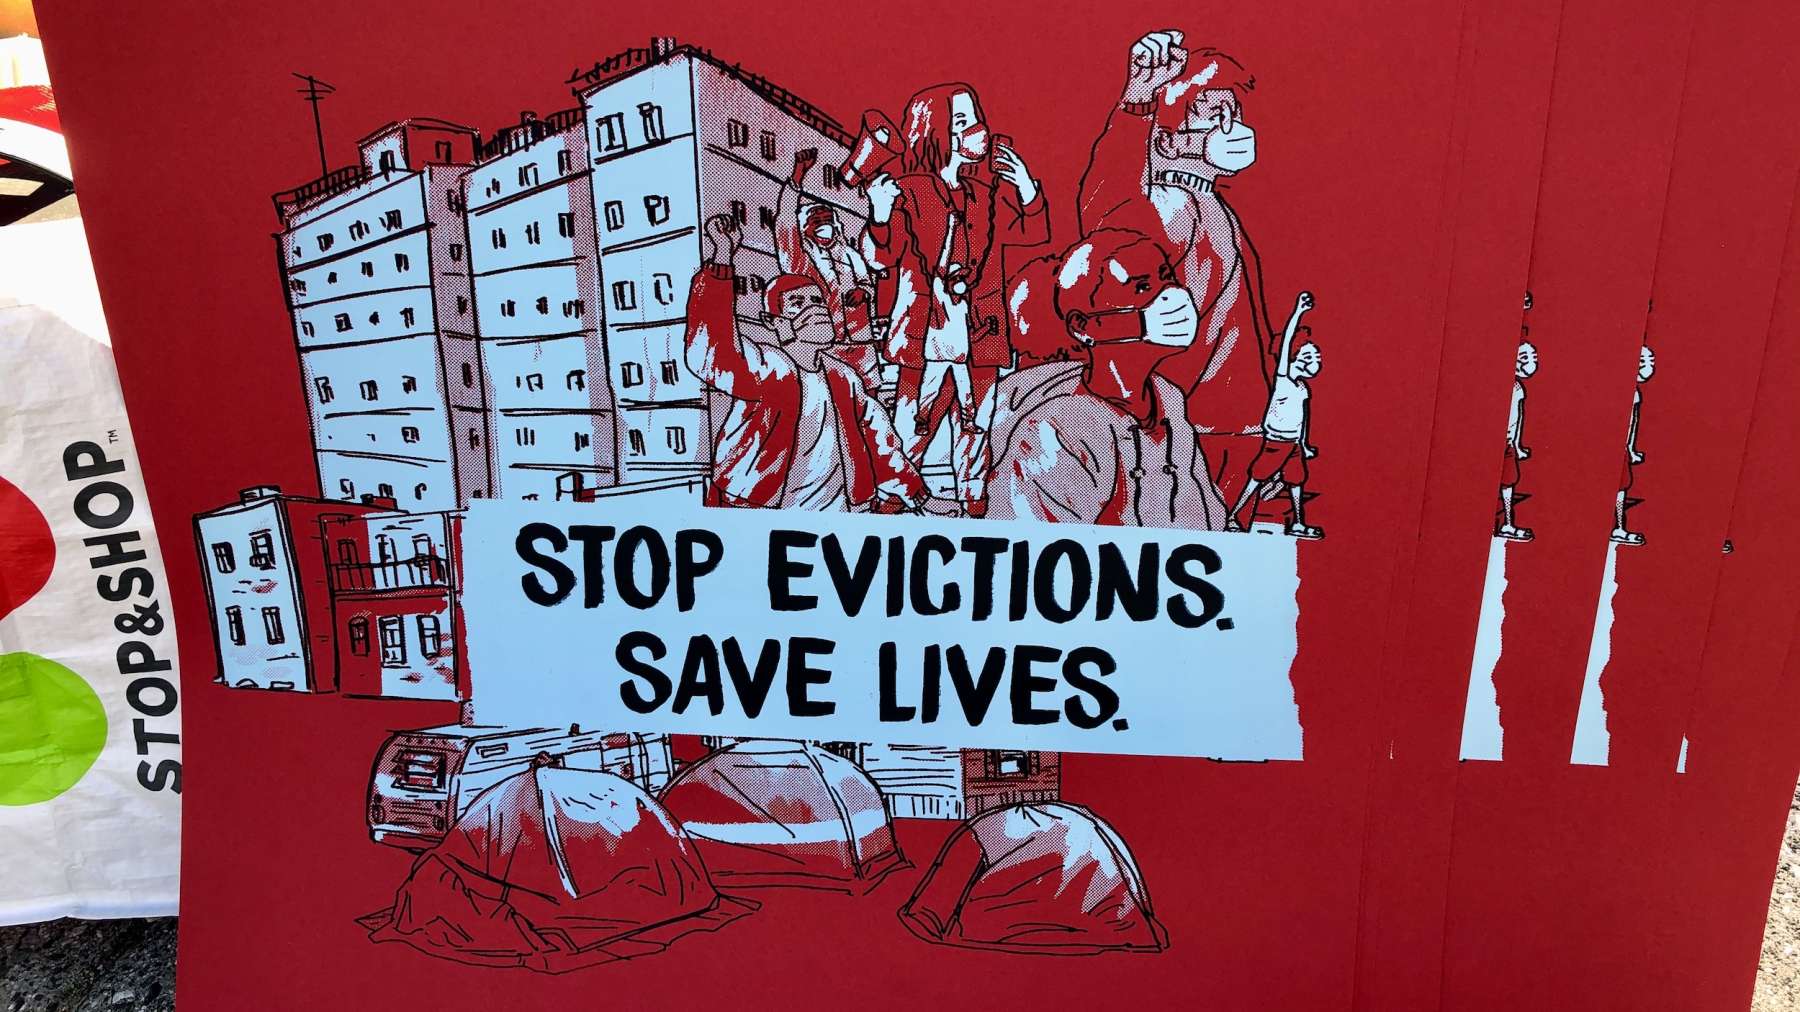 Rhode Island News: What does the new CDC eviction moratorium mean for Rhode Island?